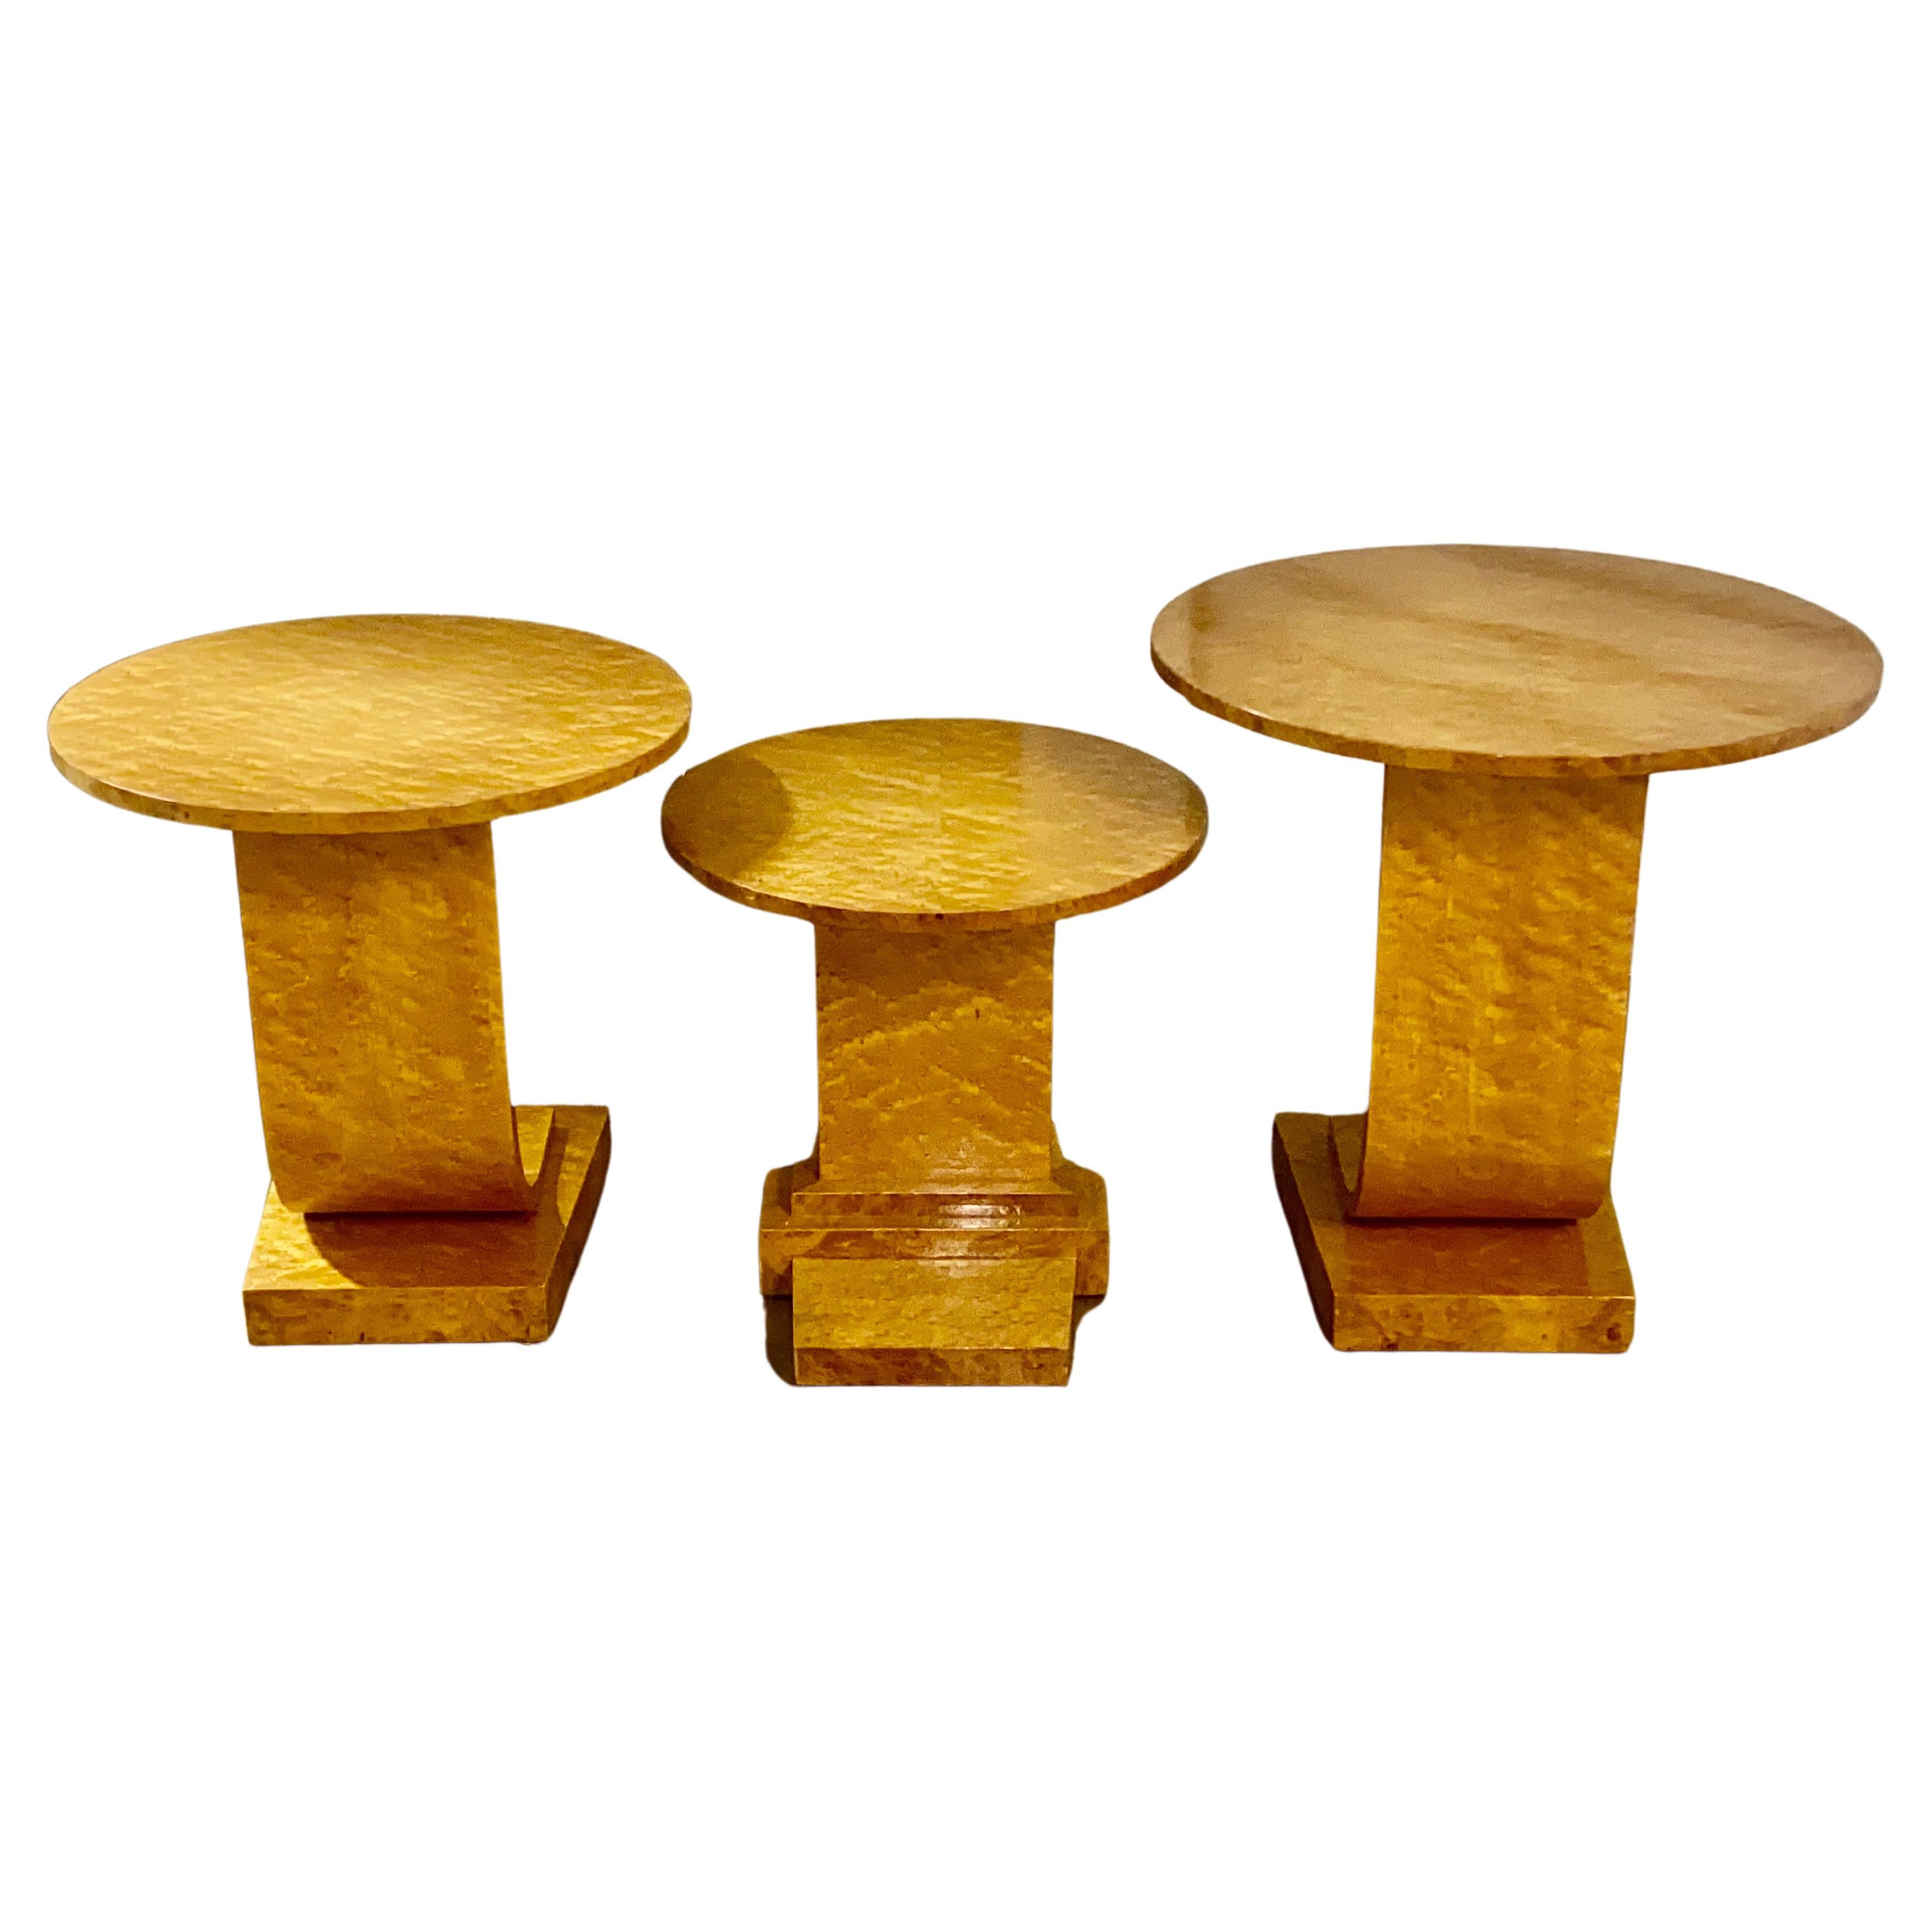 A Rare Art Deco Blonde Birds Eye Maple J Nest of Tables by Epstein Circa 1930 For Sale 4